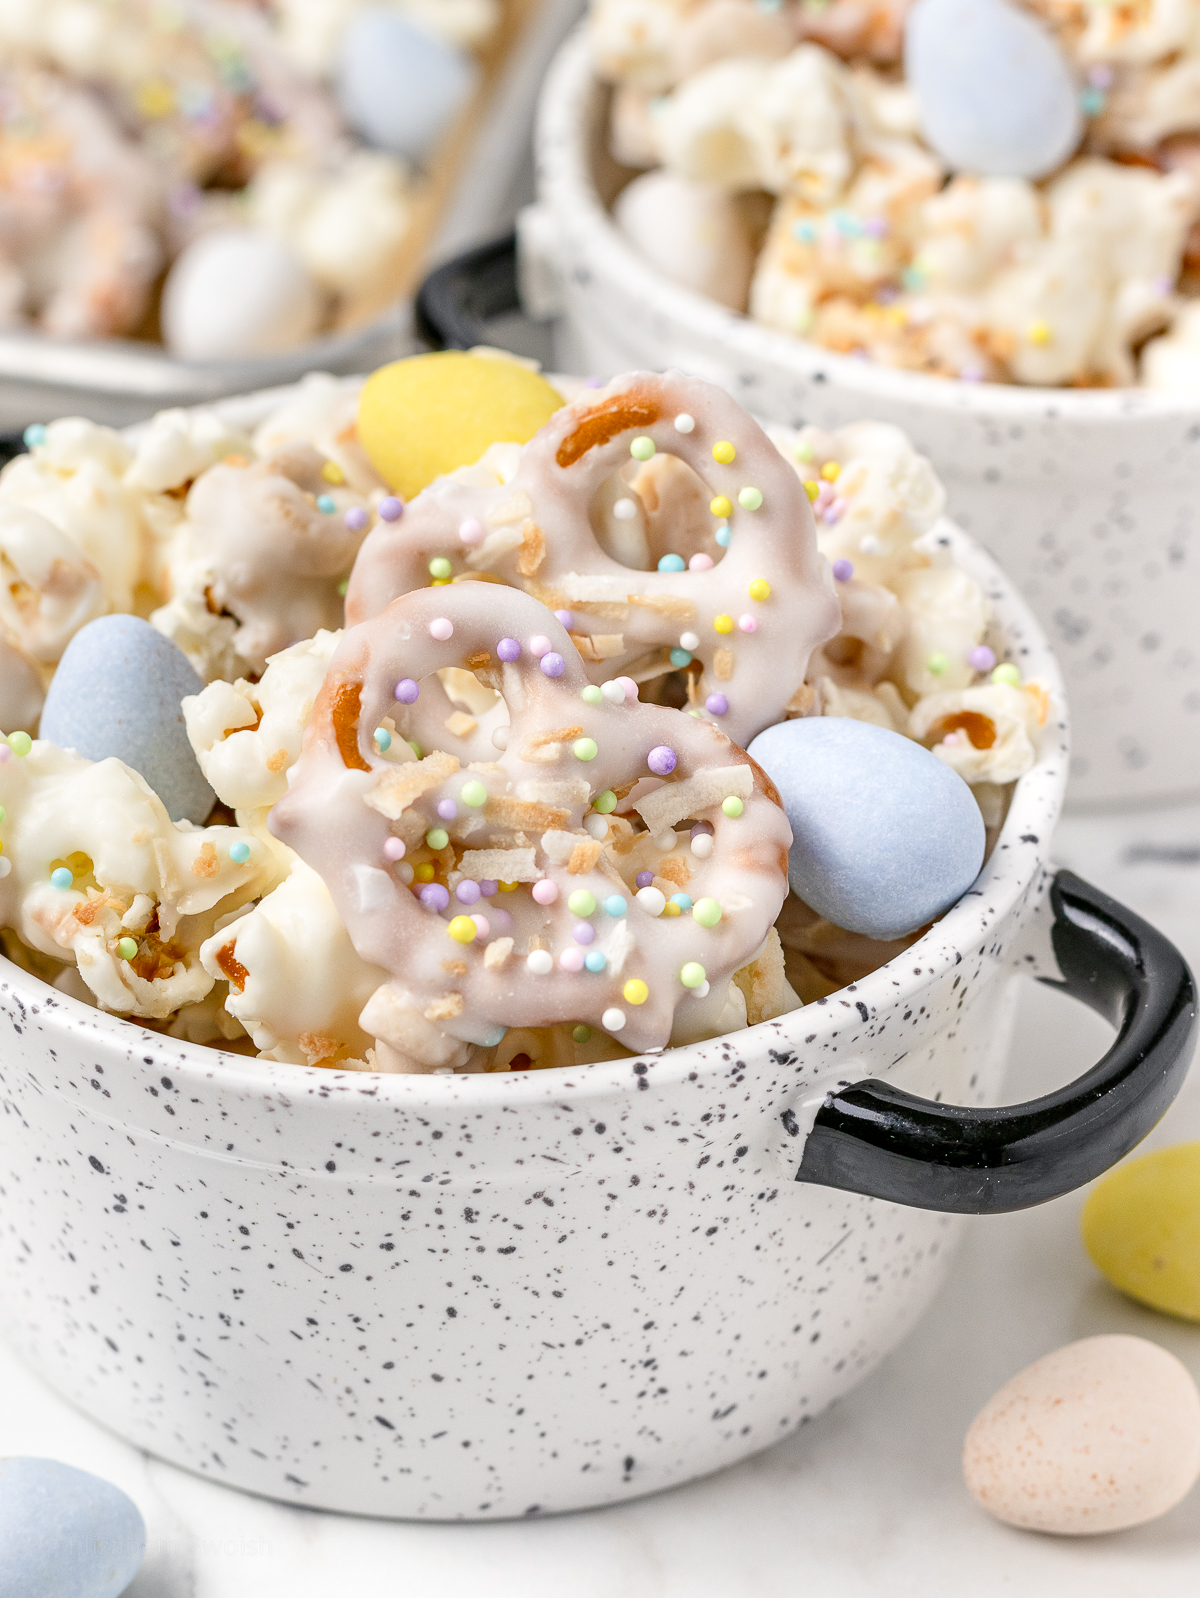 A bowl of Bunny Popcorn Snack Mix with white chocolate coated popcorn, pretzels, toasted O's cereal topped with milk chocolate candy eggs, and pastel Easter sprinkles.